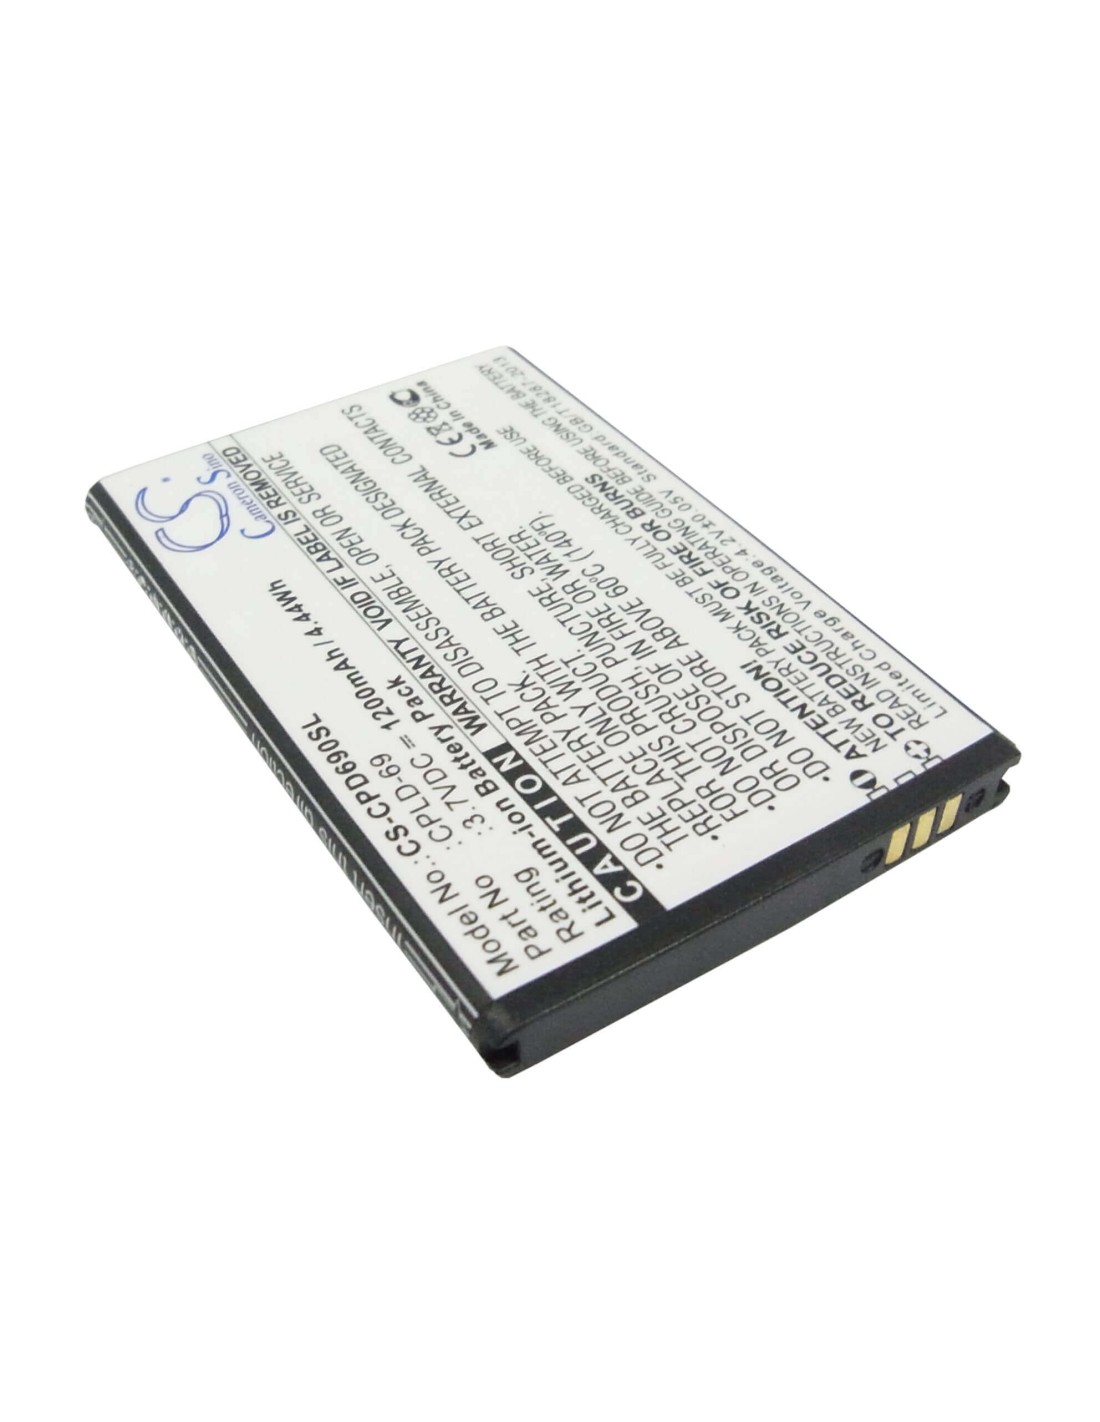 Battery for Coolpad 8809 3.7V, 1200mAh - 4.44Wh